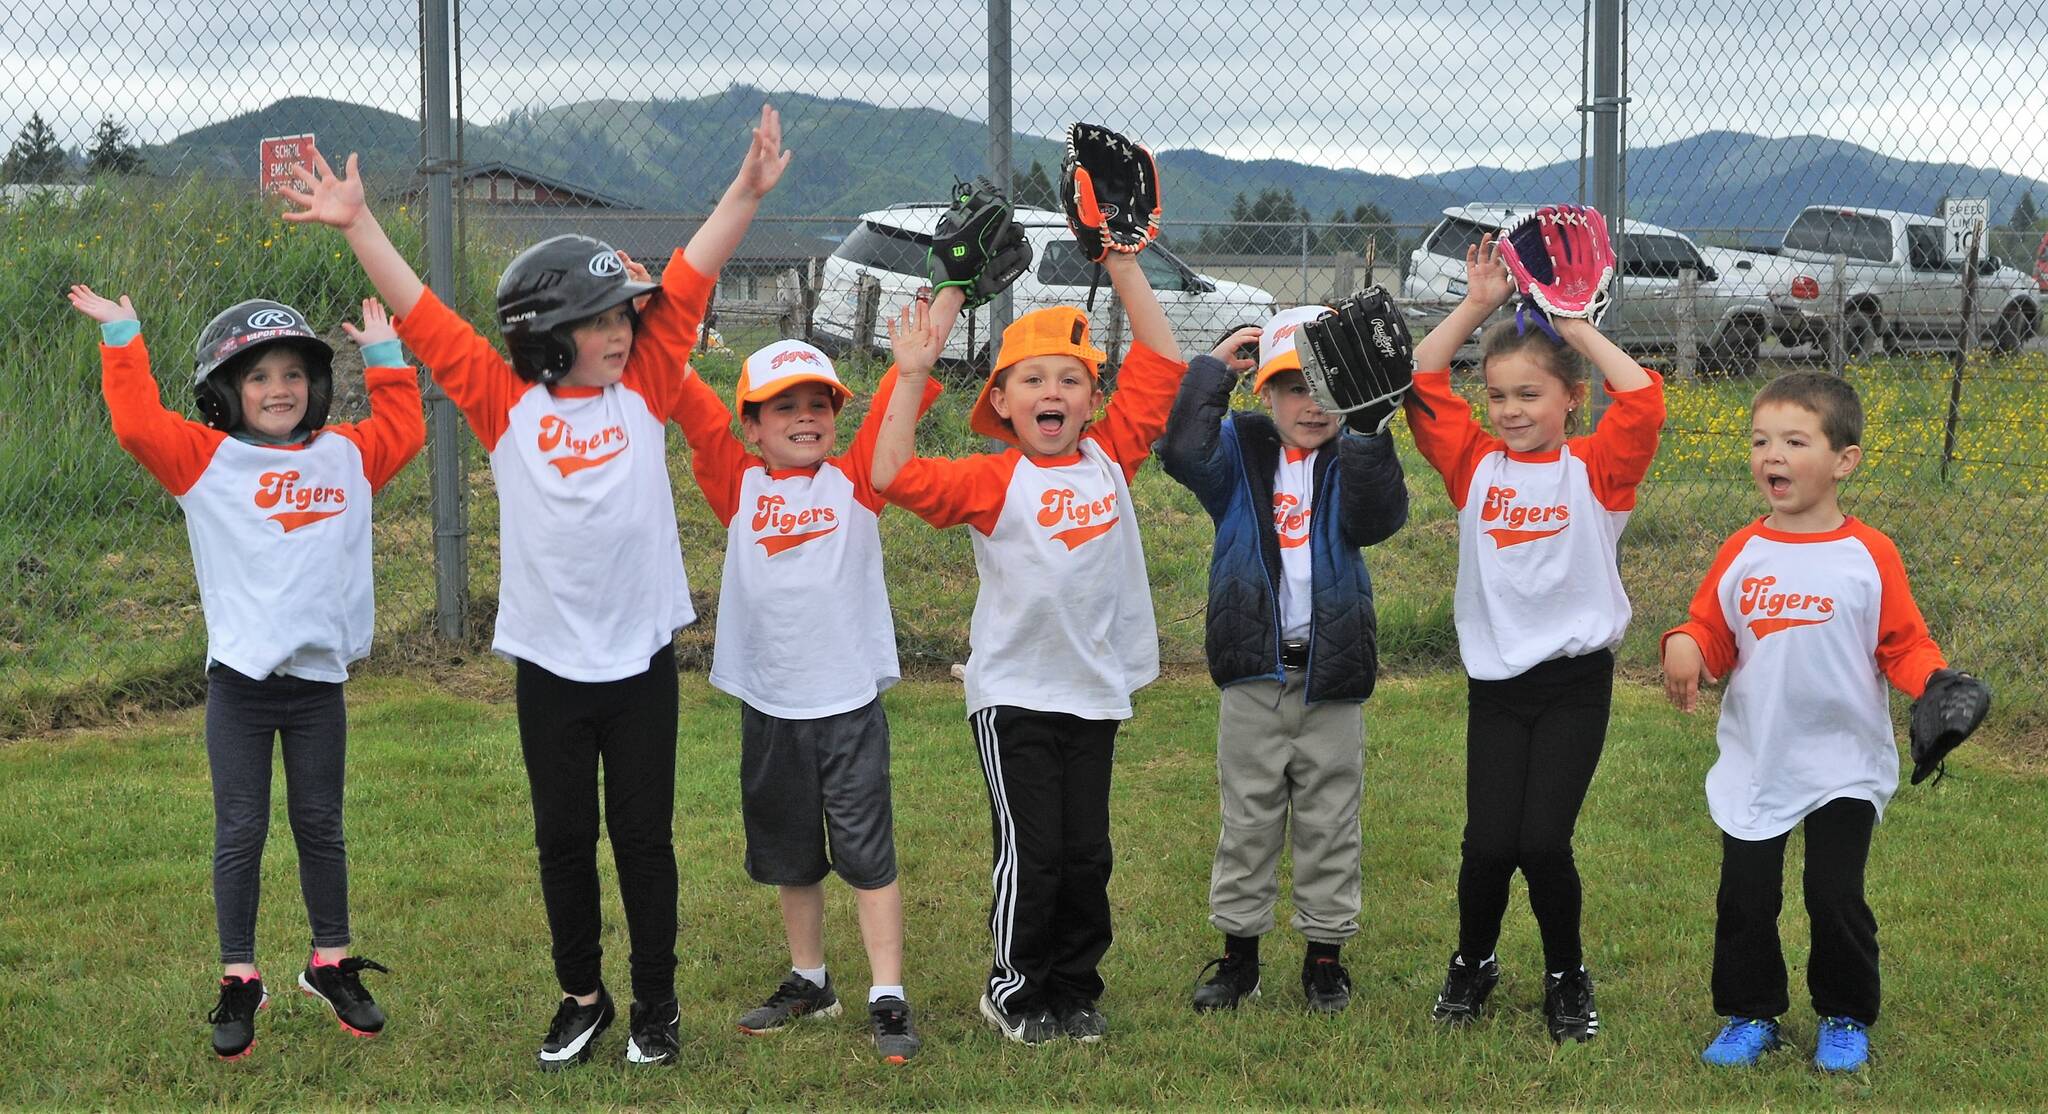 The Tigers celebrated as they also thought they had just won the World Series, but you know what? I think all six teams were winners on this last evening of T-Ball here in Forks. Here on Duncan Fields. Photo by Lonnie Archibald